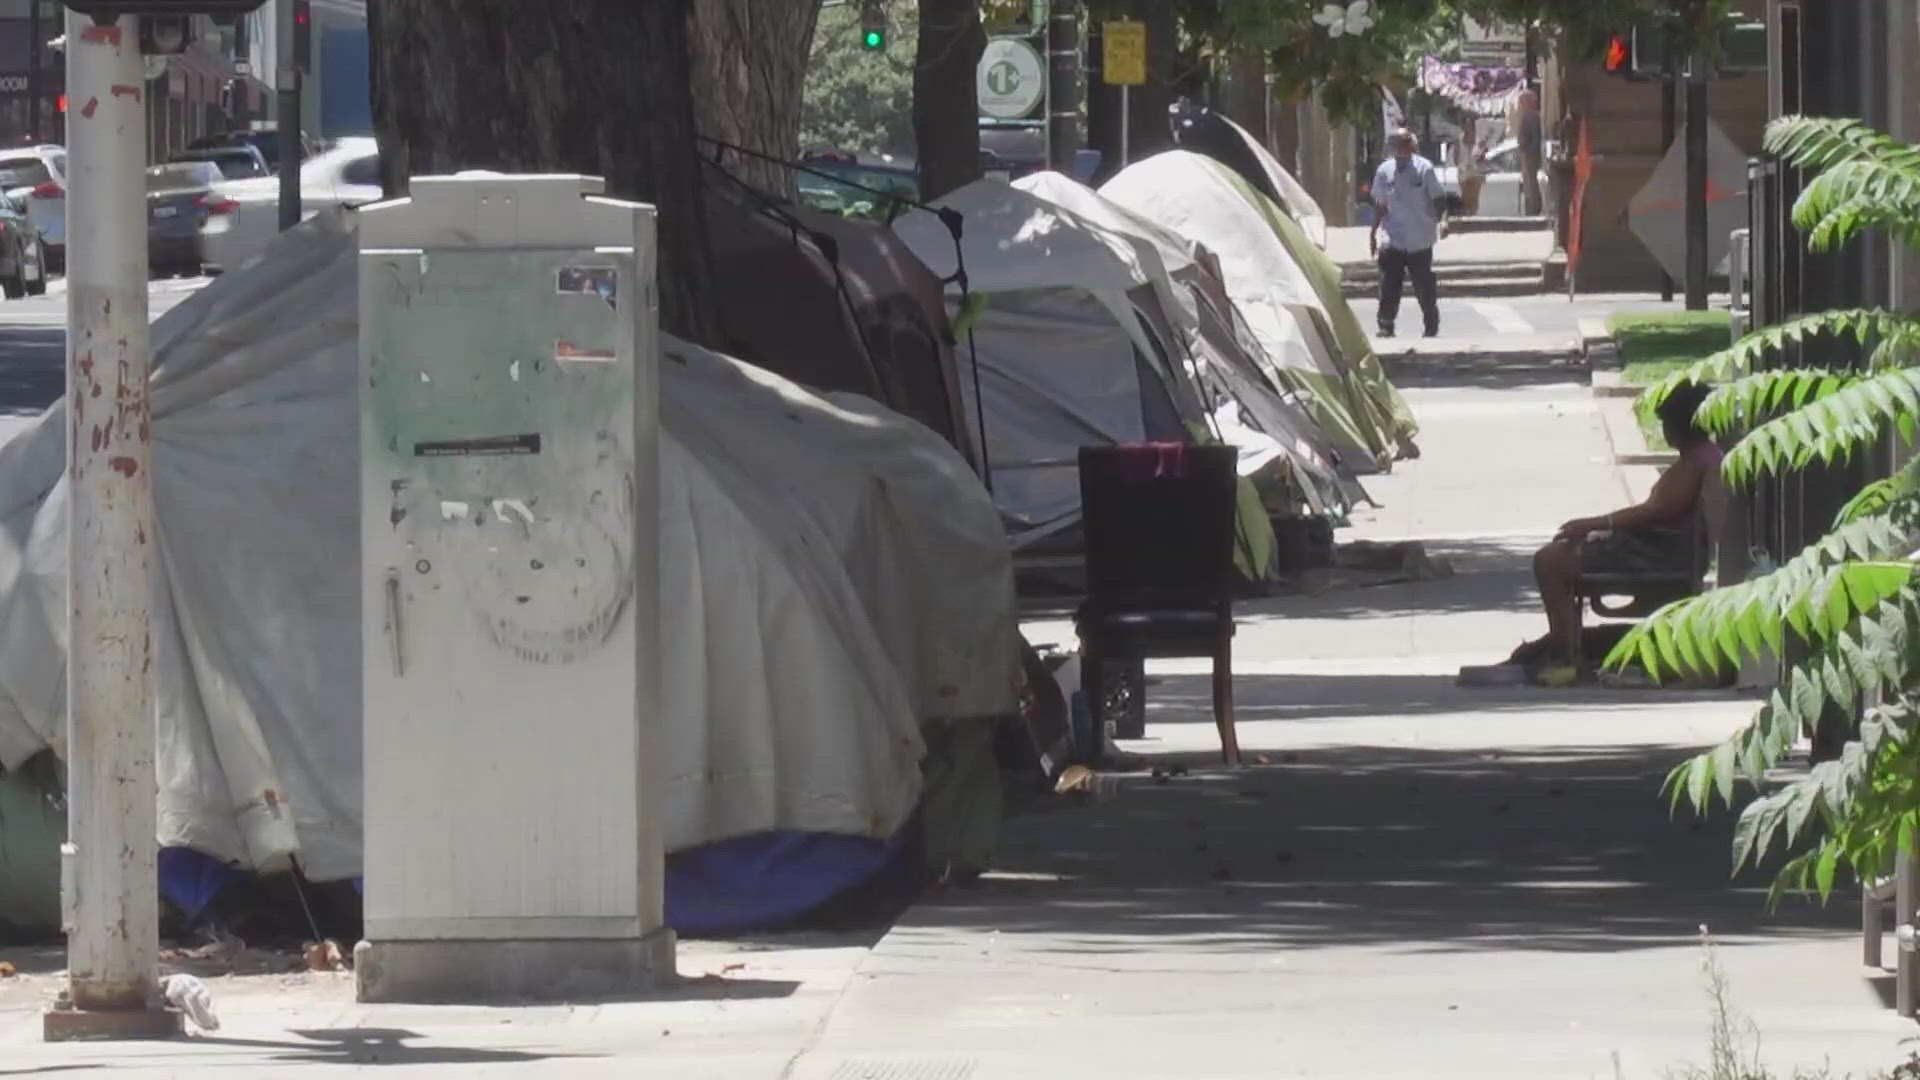 Seven month battle between the city and Sacramento District attorney over homeless crisis continues